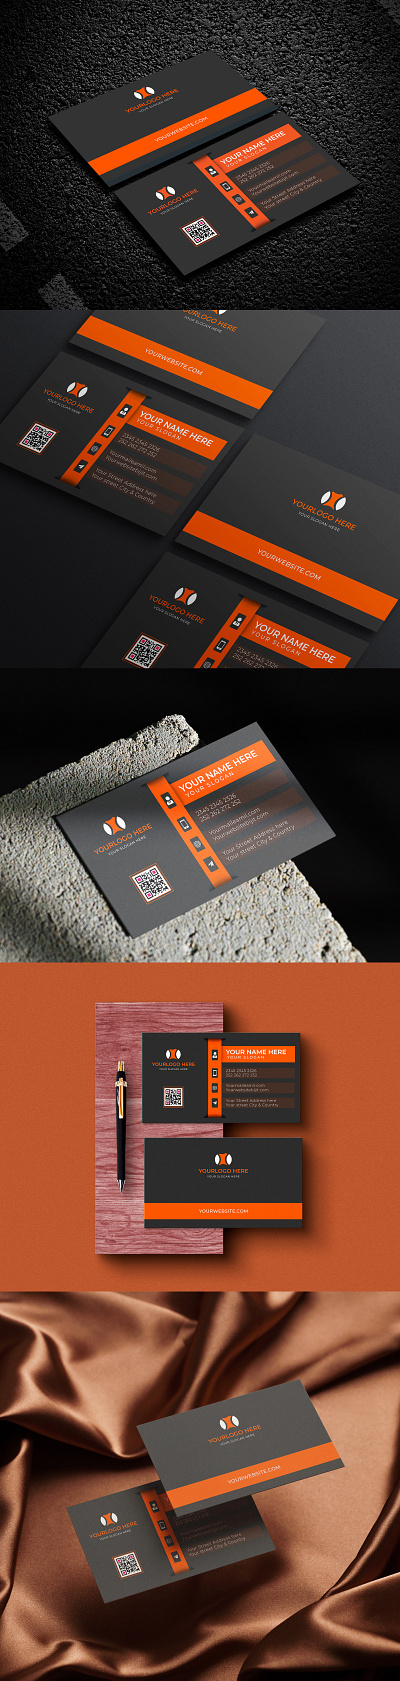 Business Card Design brand identity branding business card business card design business card print corporate business card graphic design smart card visiting card